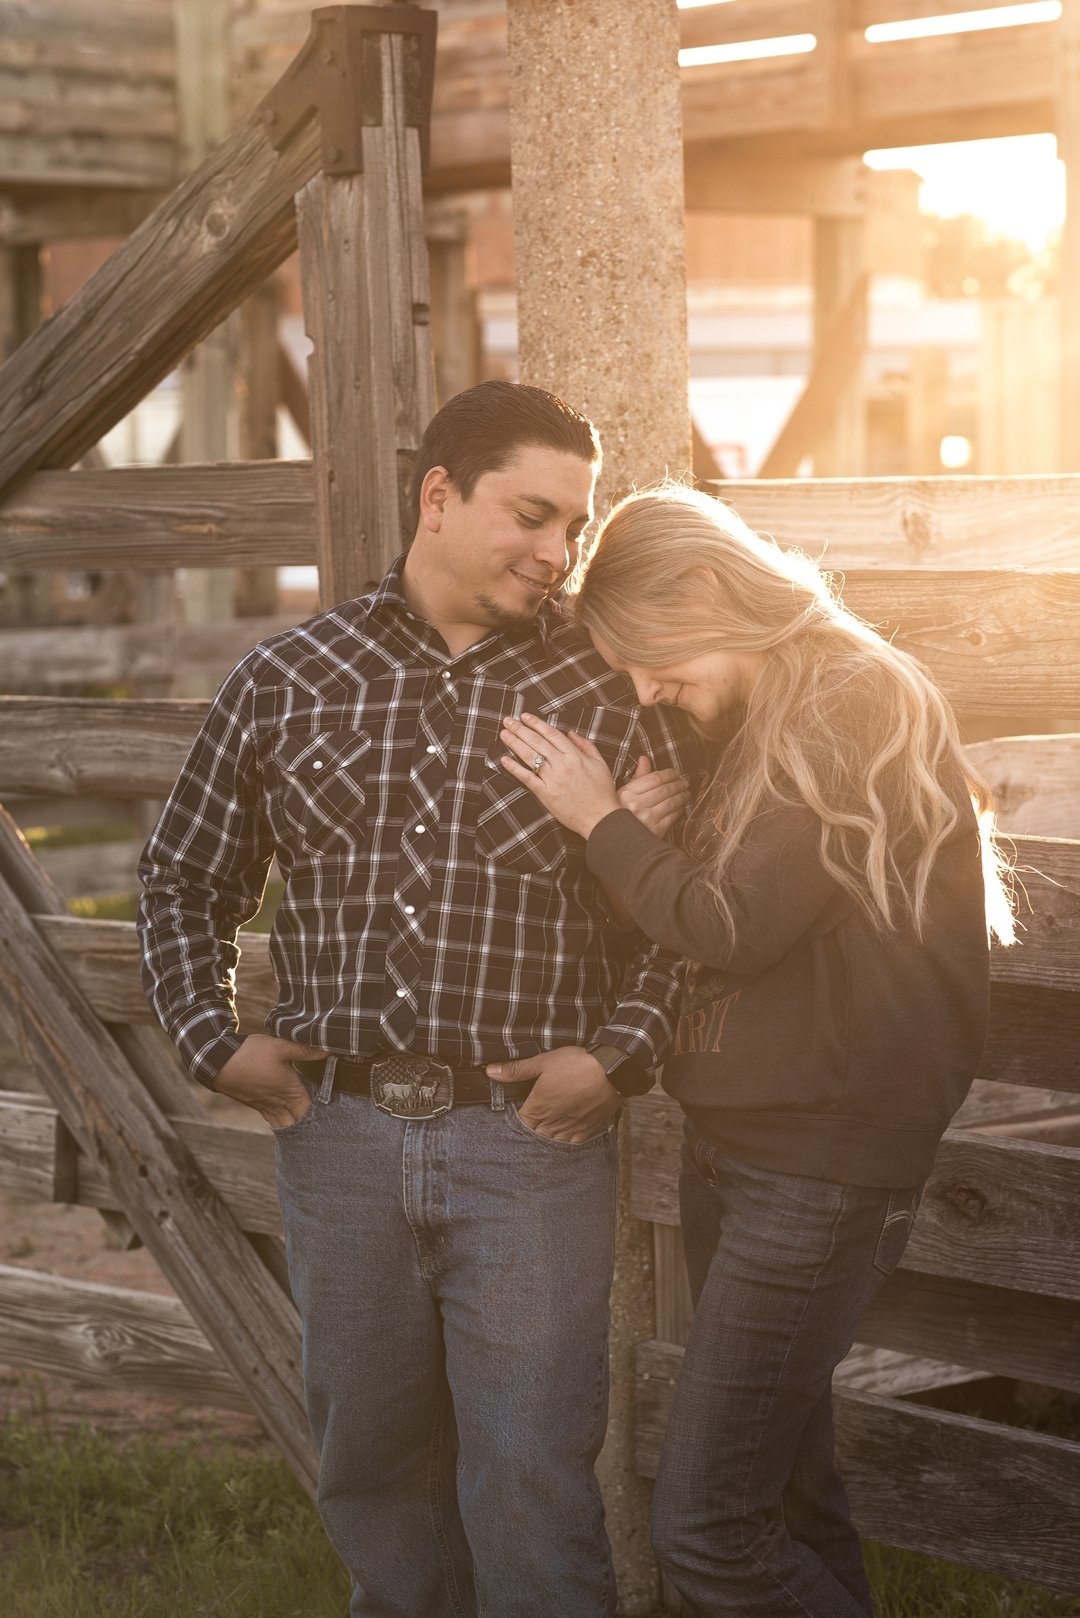 Engagement session at the Stockyards is just the most beautiful thing! 

#familyminisessiondfw #familyminisessiondallas #dallasfamilyminisession #dfwfamilyphotographer #dallasfamilyphotographer #dallasphotographer #dallasphotography  #dfwfamilyphotog